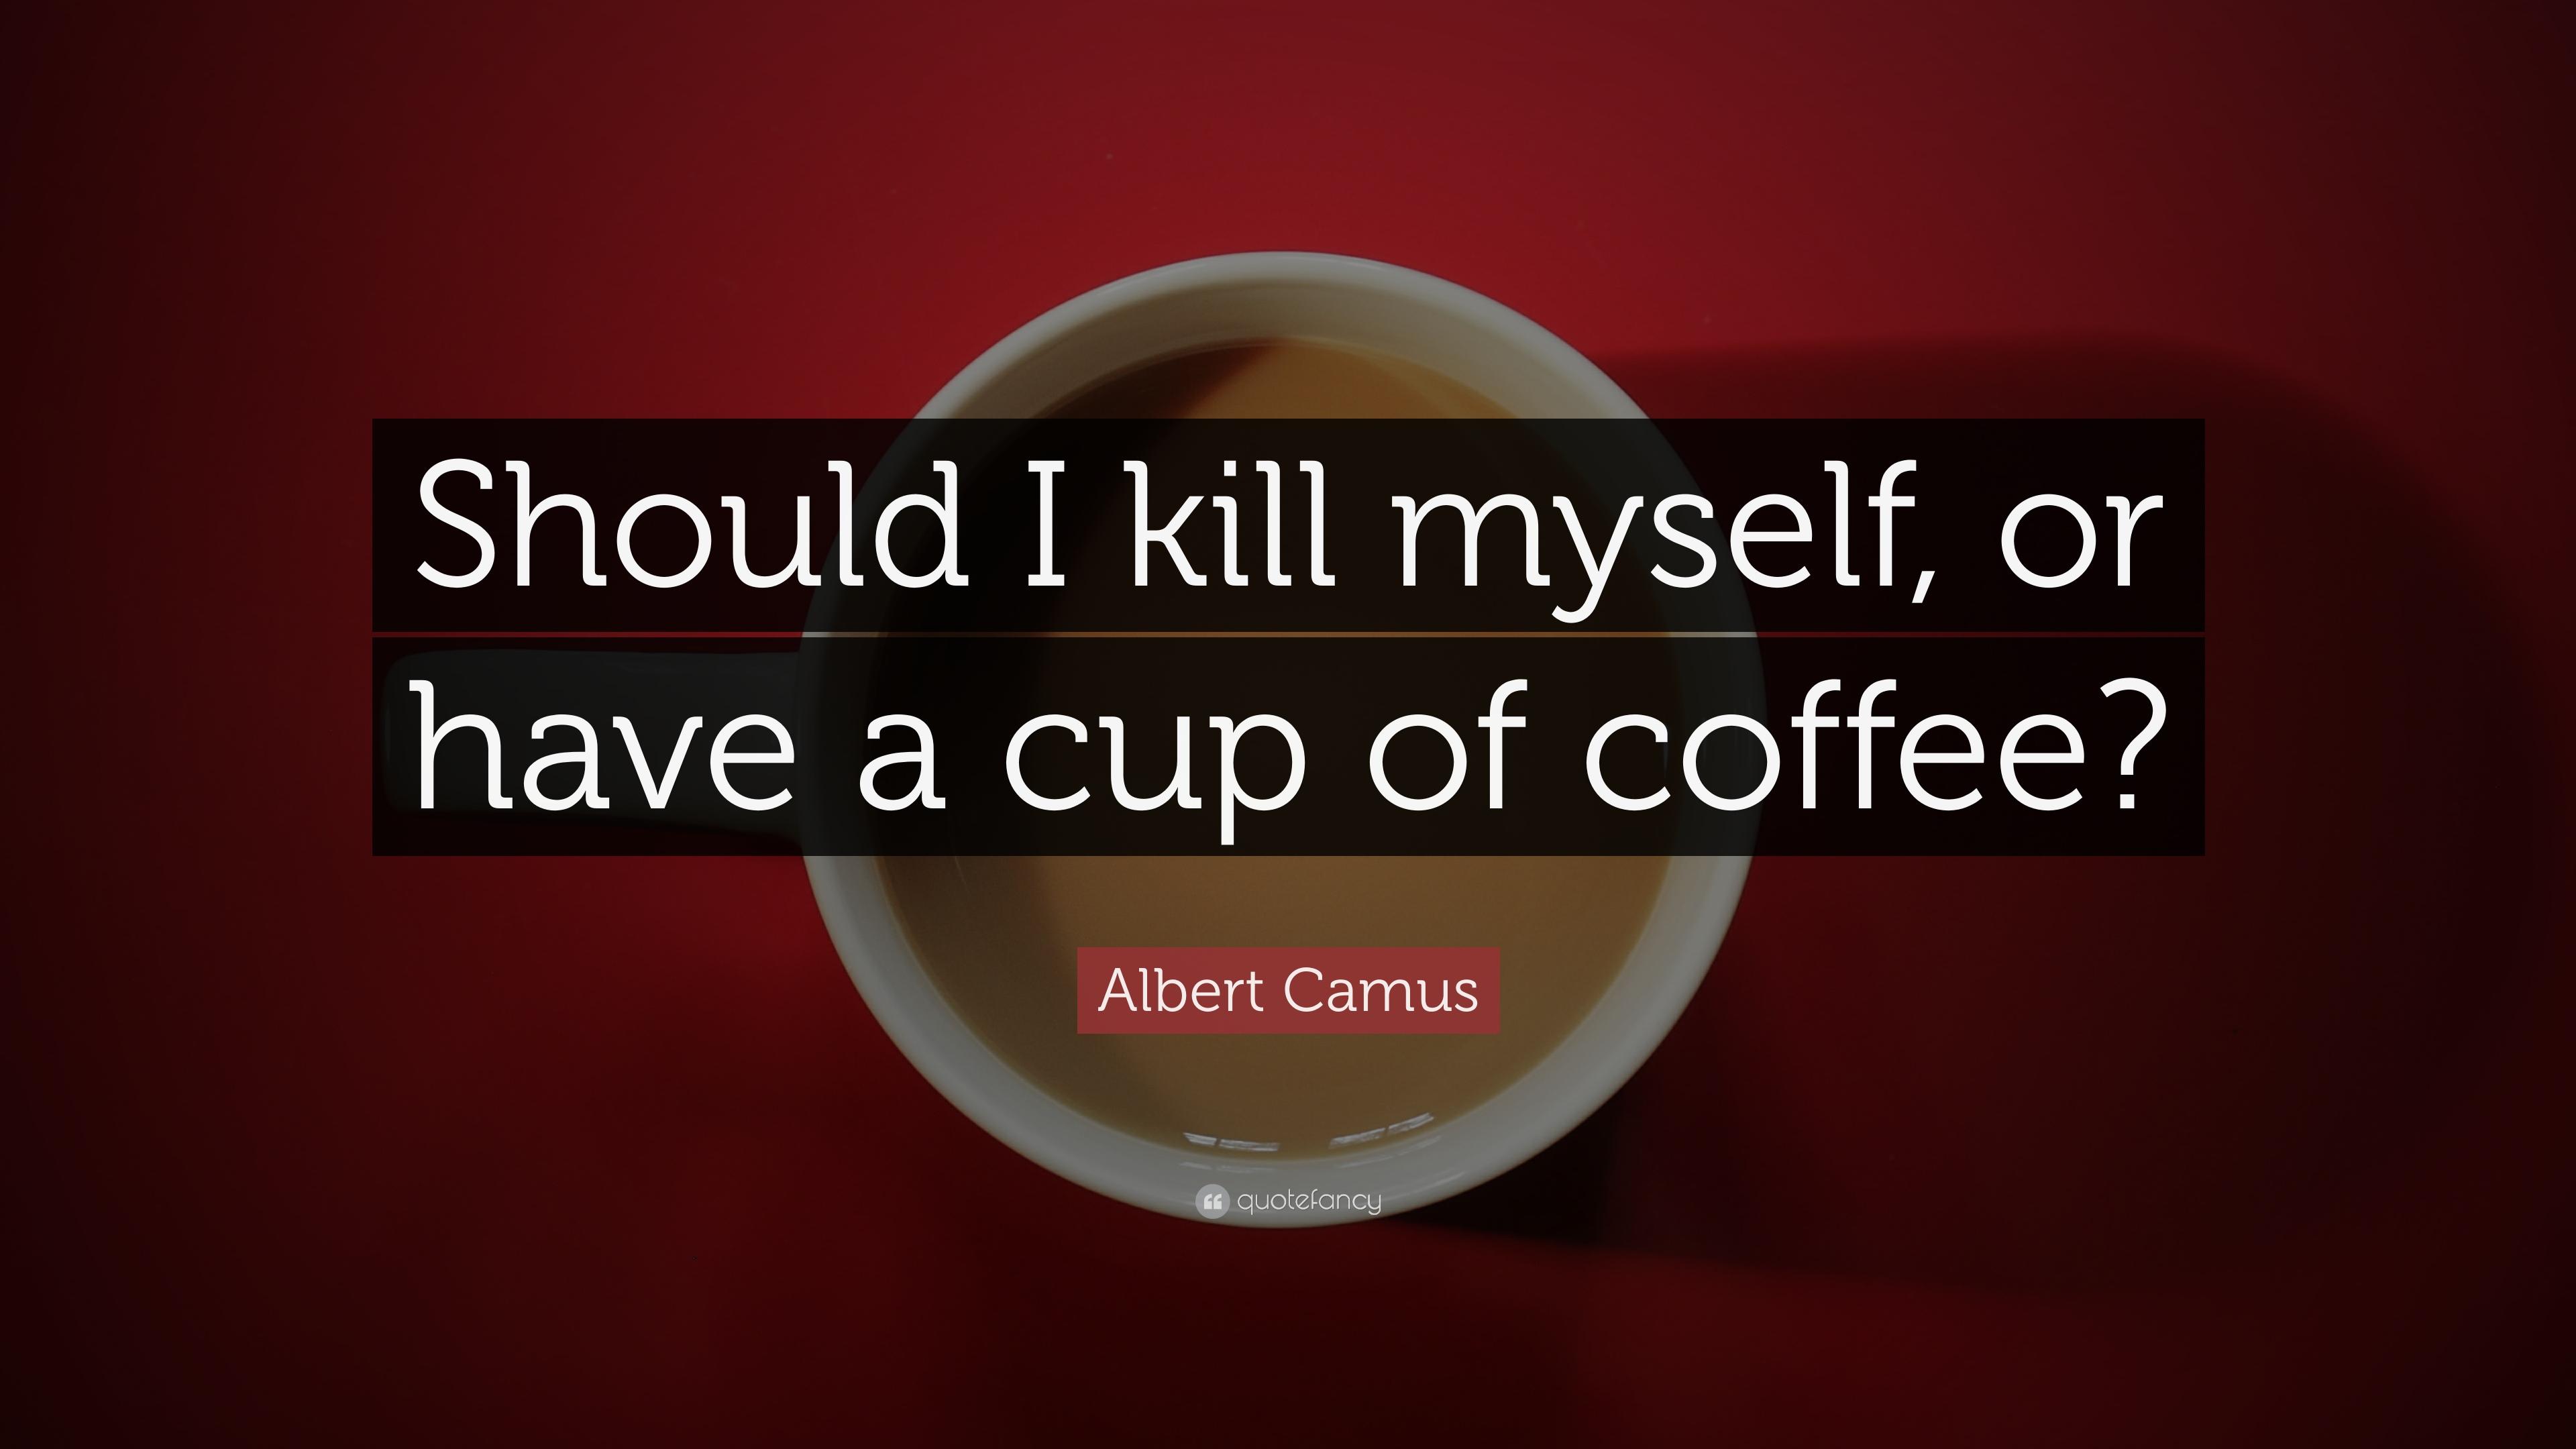 Albert Camus Quote: “Should I kill myself, or have a cup